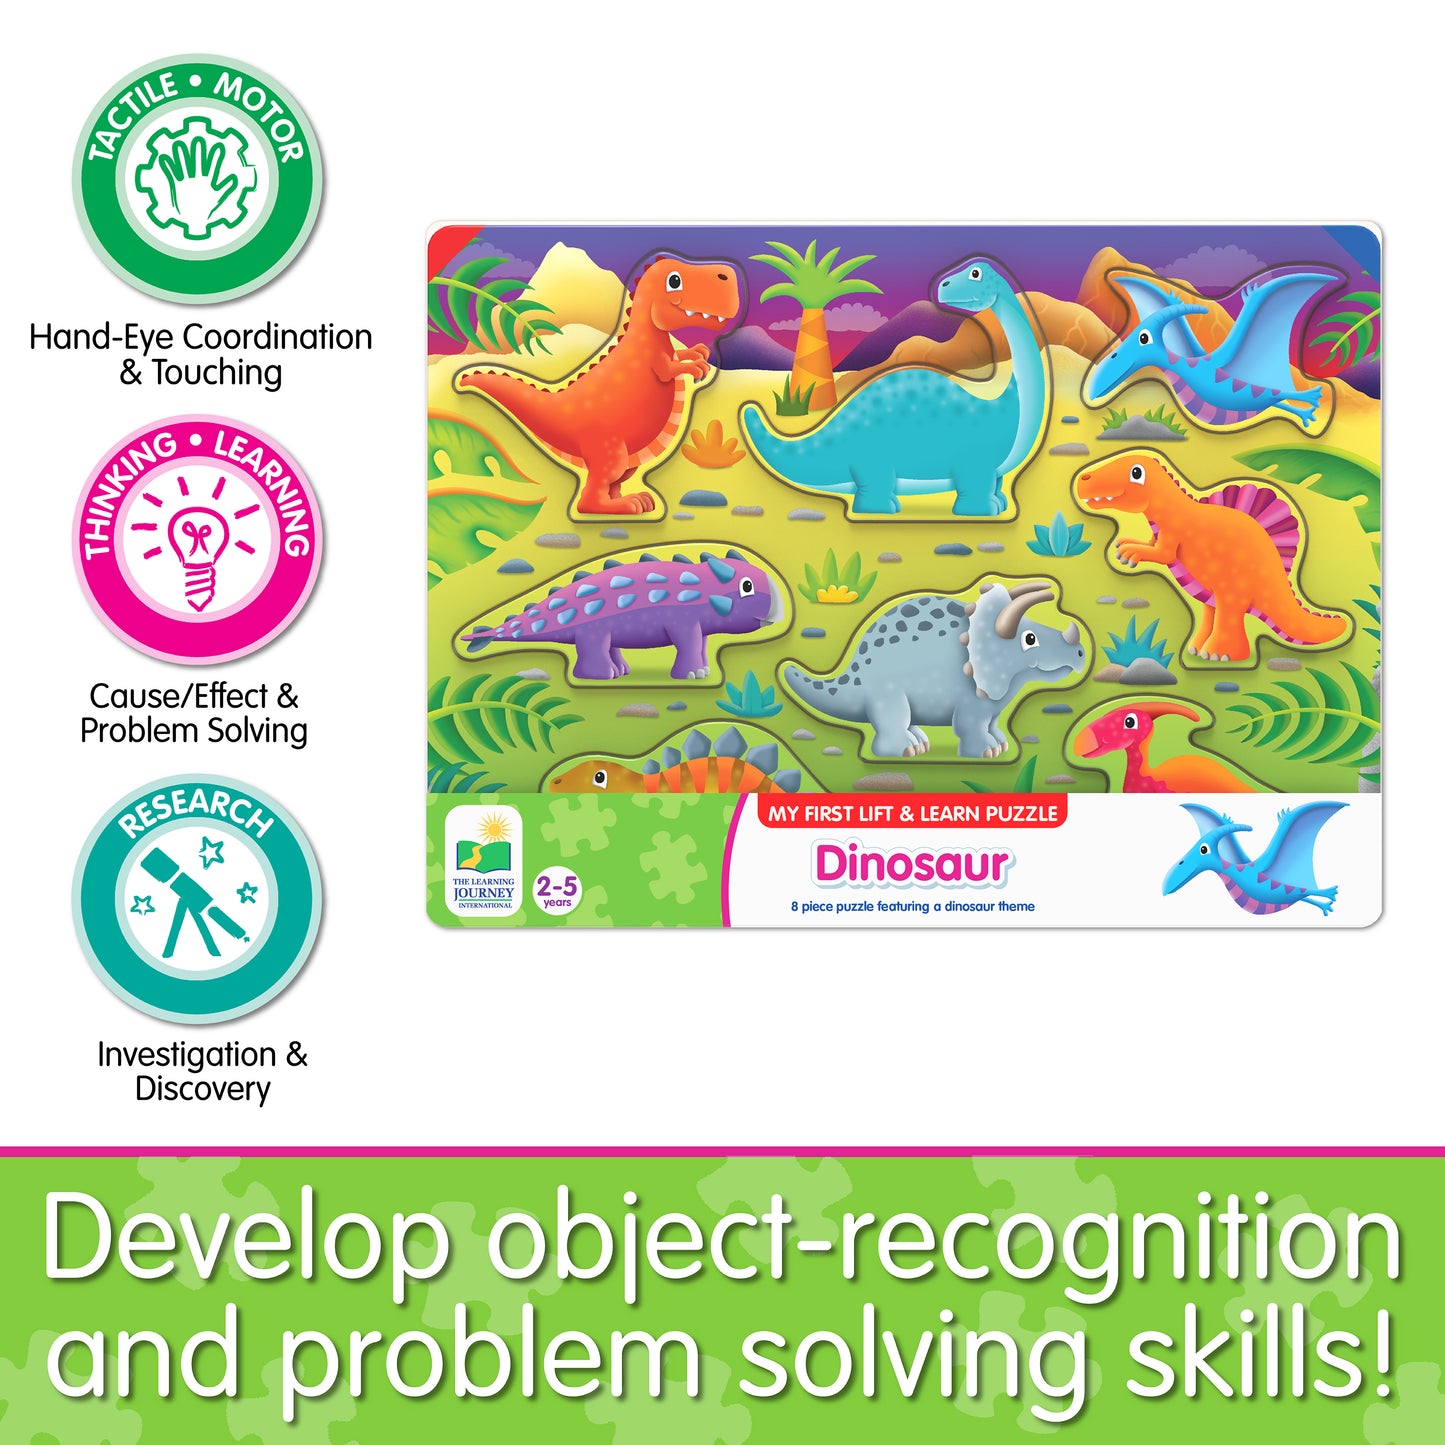 Infographic about My First Lift and Learn Dinosaur Puzzle's educational benefits that says, "Develop object-recognition and problem solving skills!"